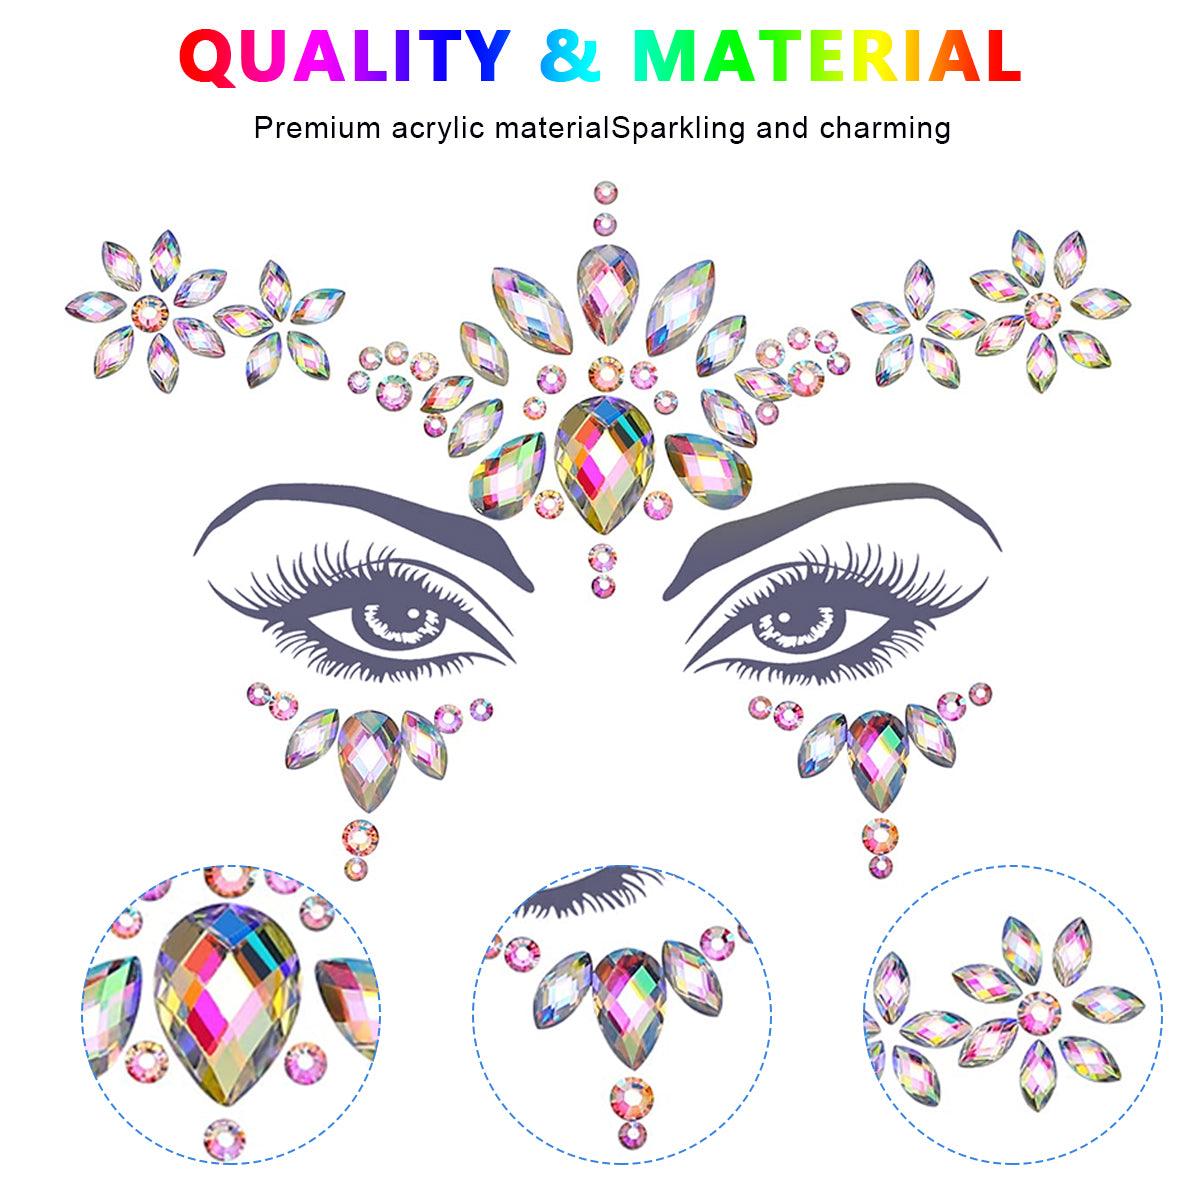 MAYCREATE Face Gems Rhinestone Face Decoration Jewelry Sticker For Women Girls Mermaid's Tears Makeup Sticker Artist Temporary Eyes Decor Crystal Face Jewels for Festival, Party, Rave